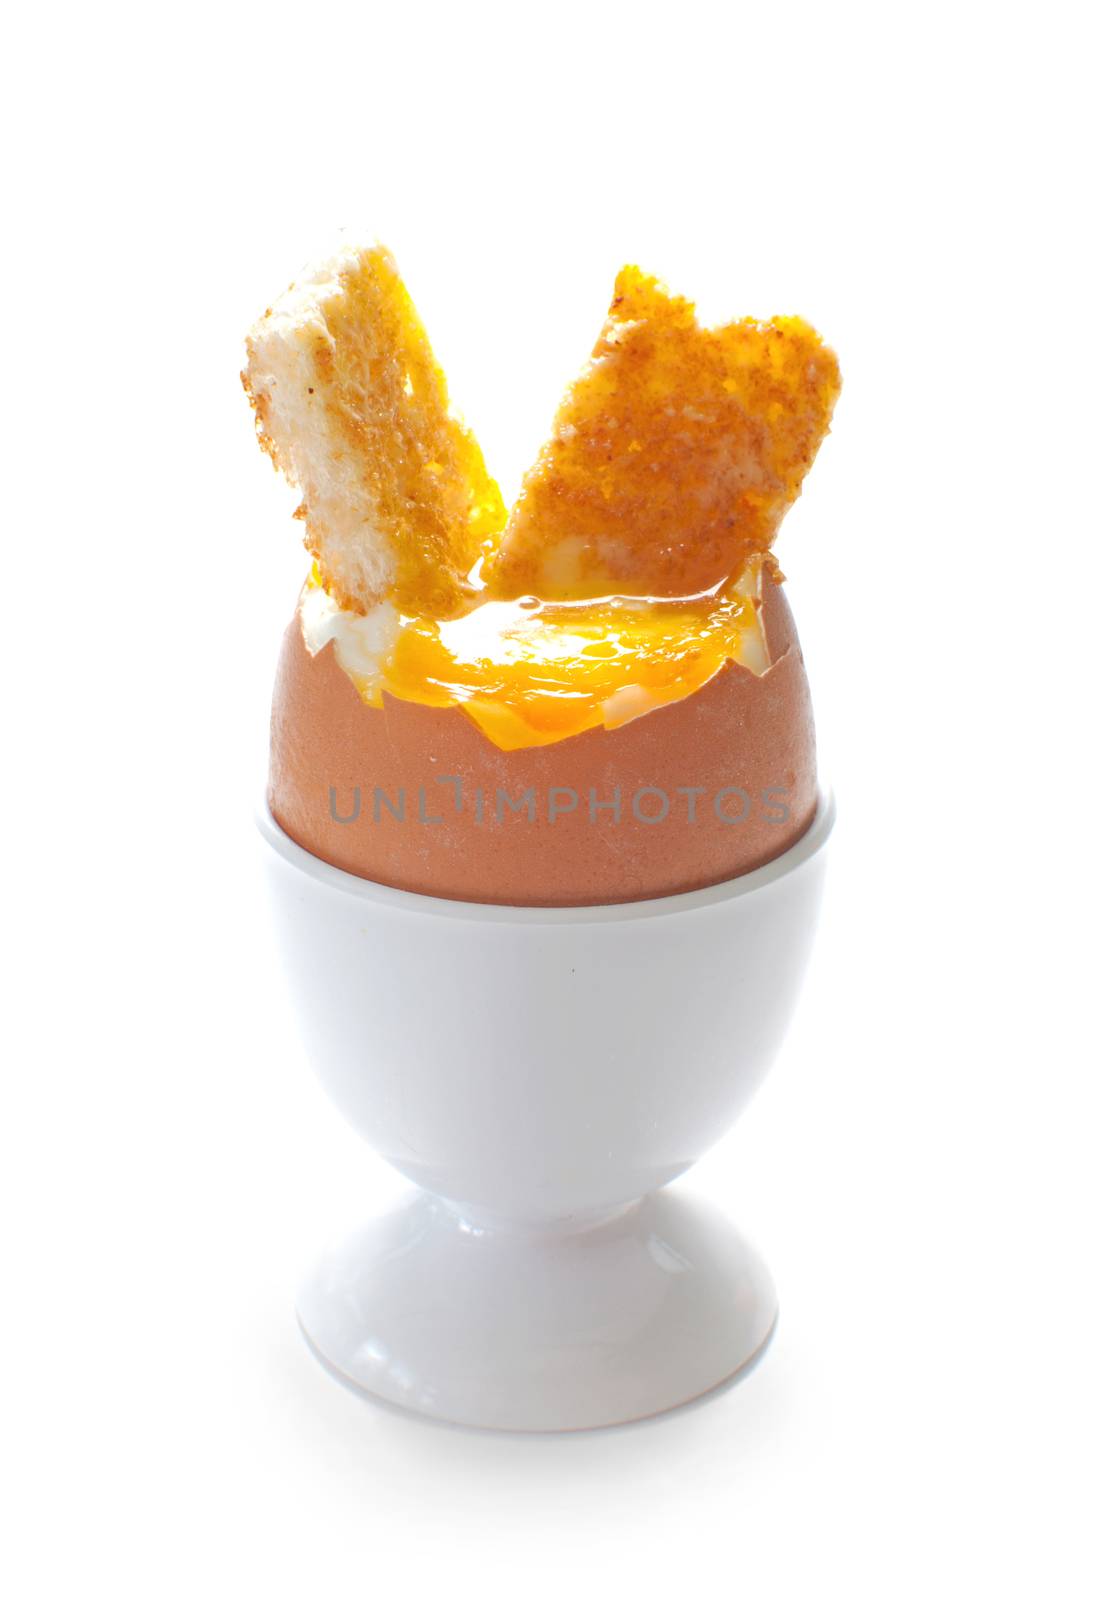 Boiled egg in a cup holder with buttered toasted soldiers 